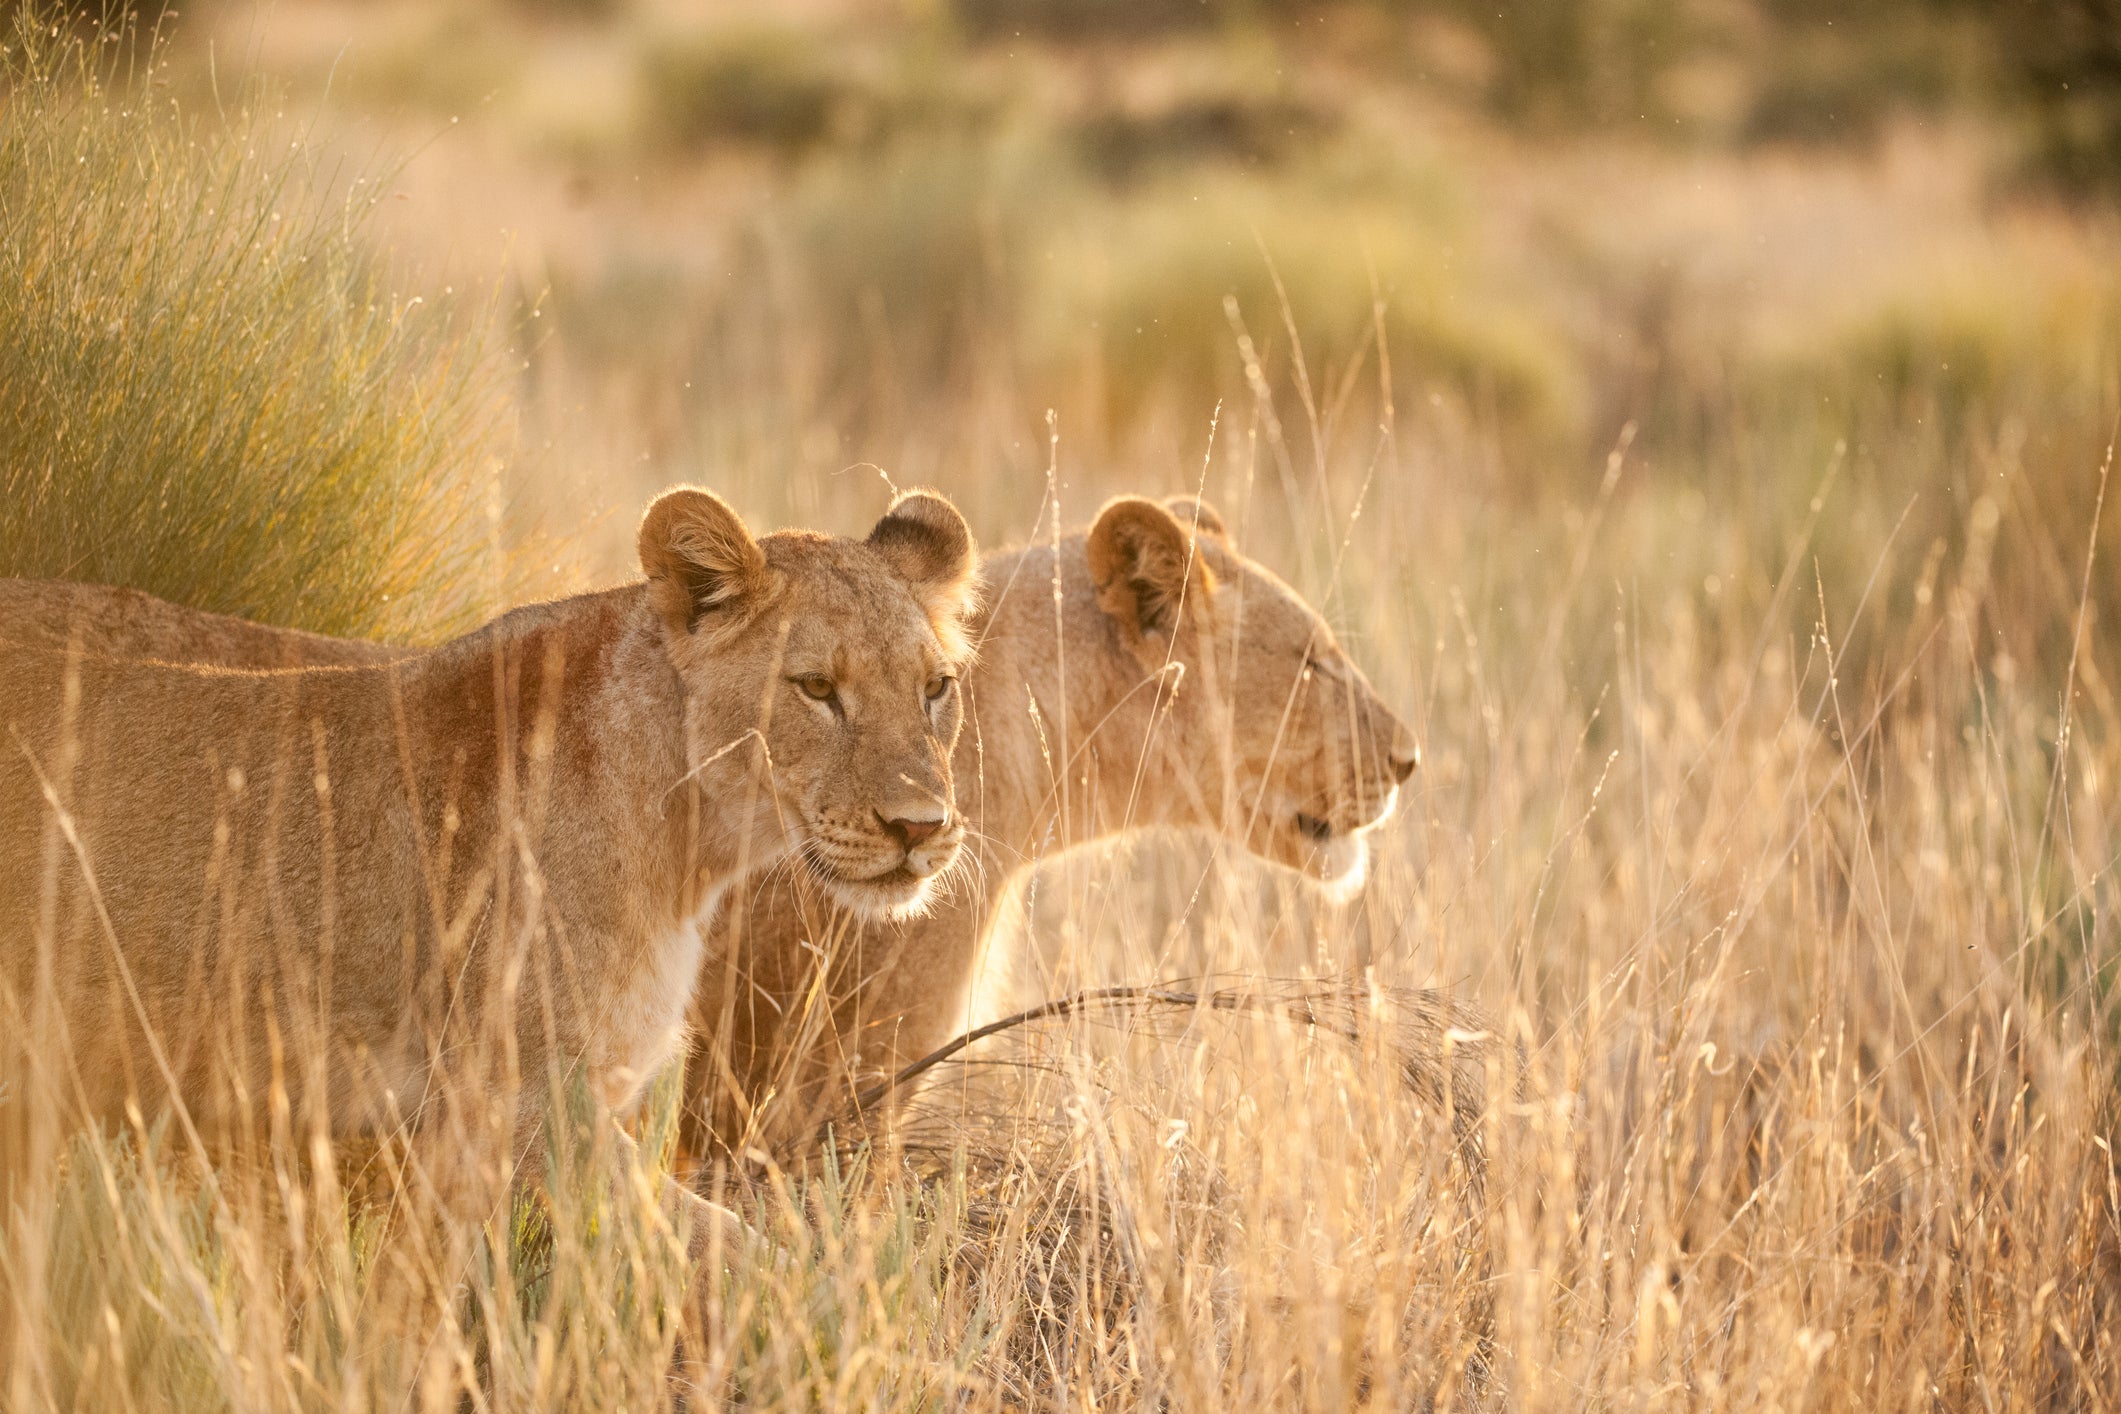 Four lions were found dead at Rietvlei Nature Reserve